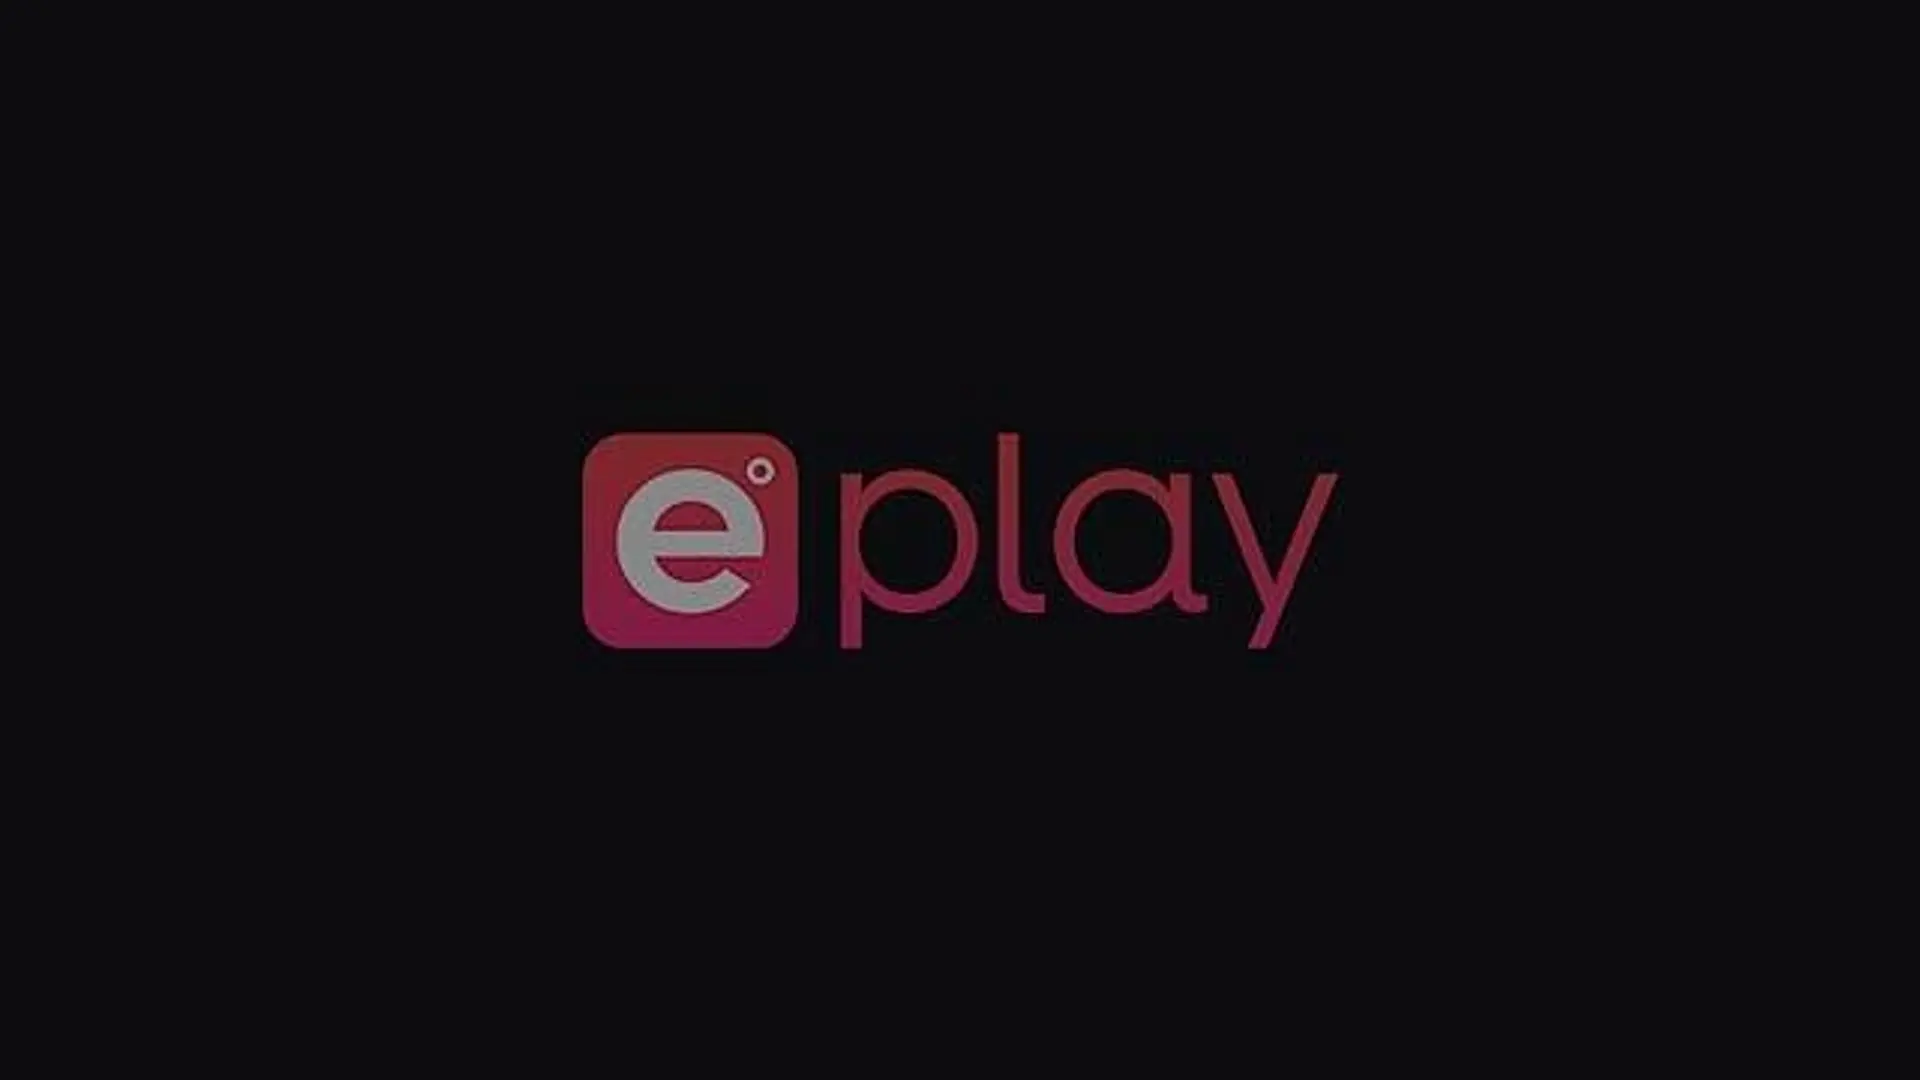 DaisyWalker's ePlay Channel